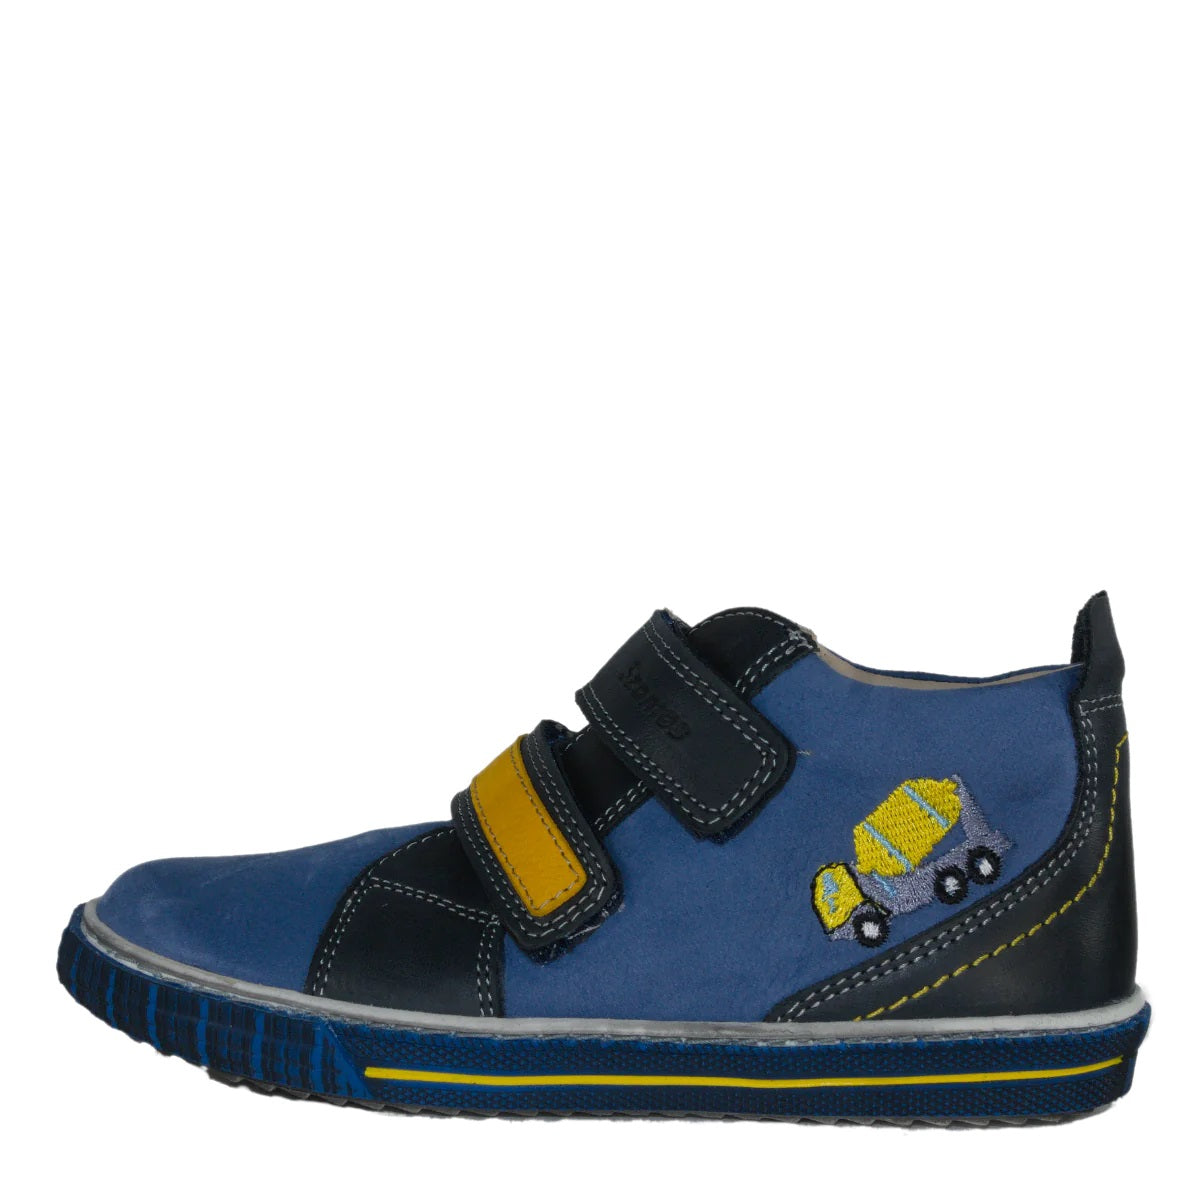 Szamos kid boy sneakers light blue with navy blue velcro straps and mixer car decor little kid/big kid size